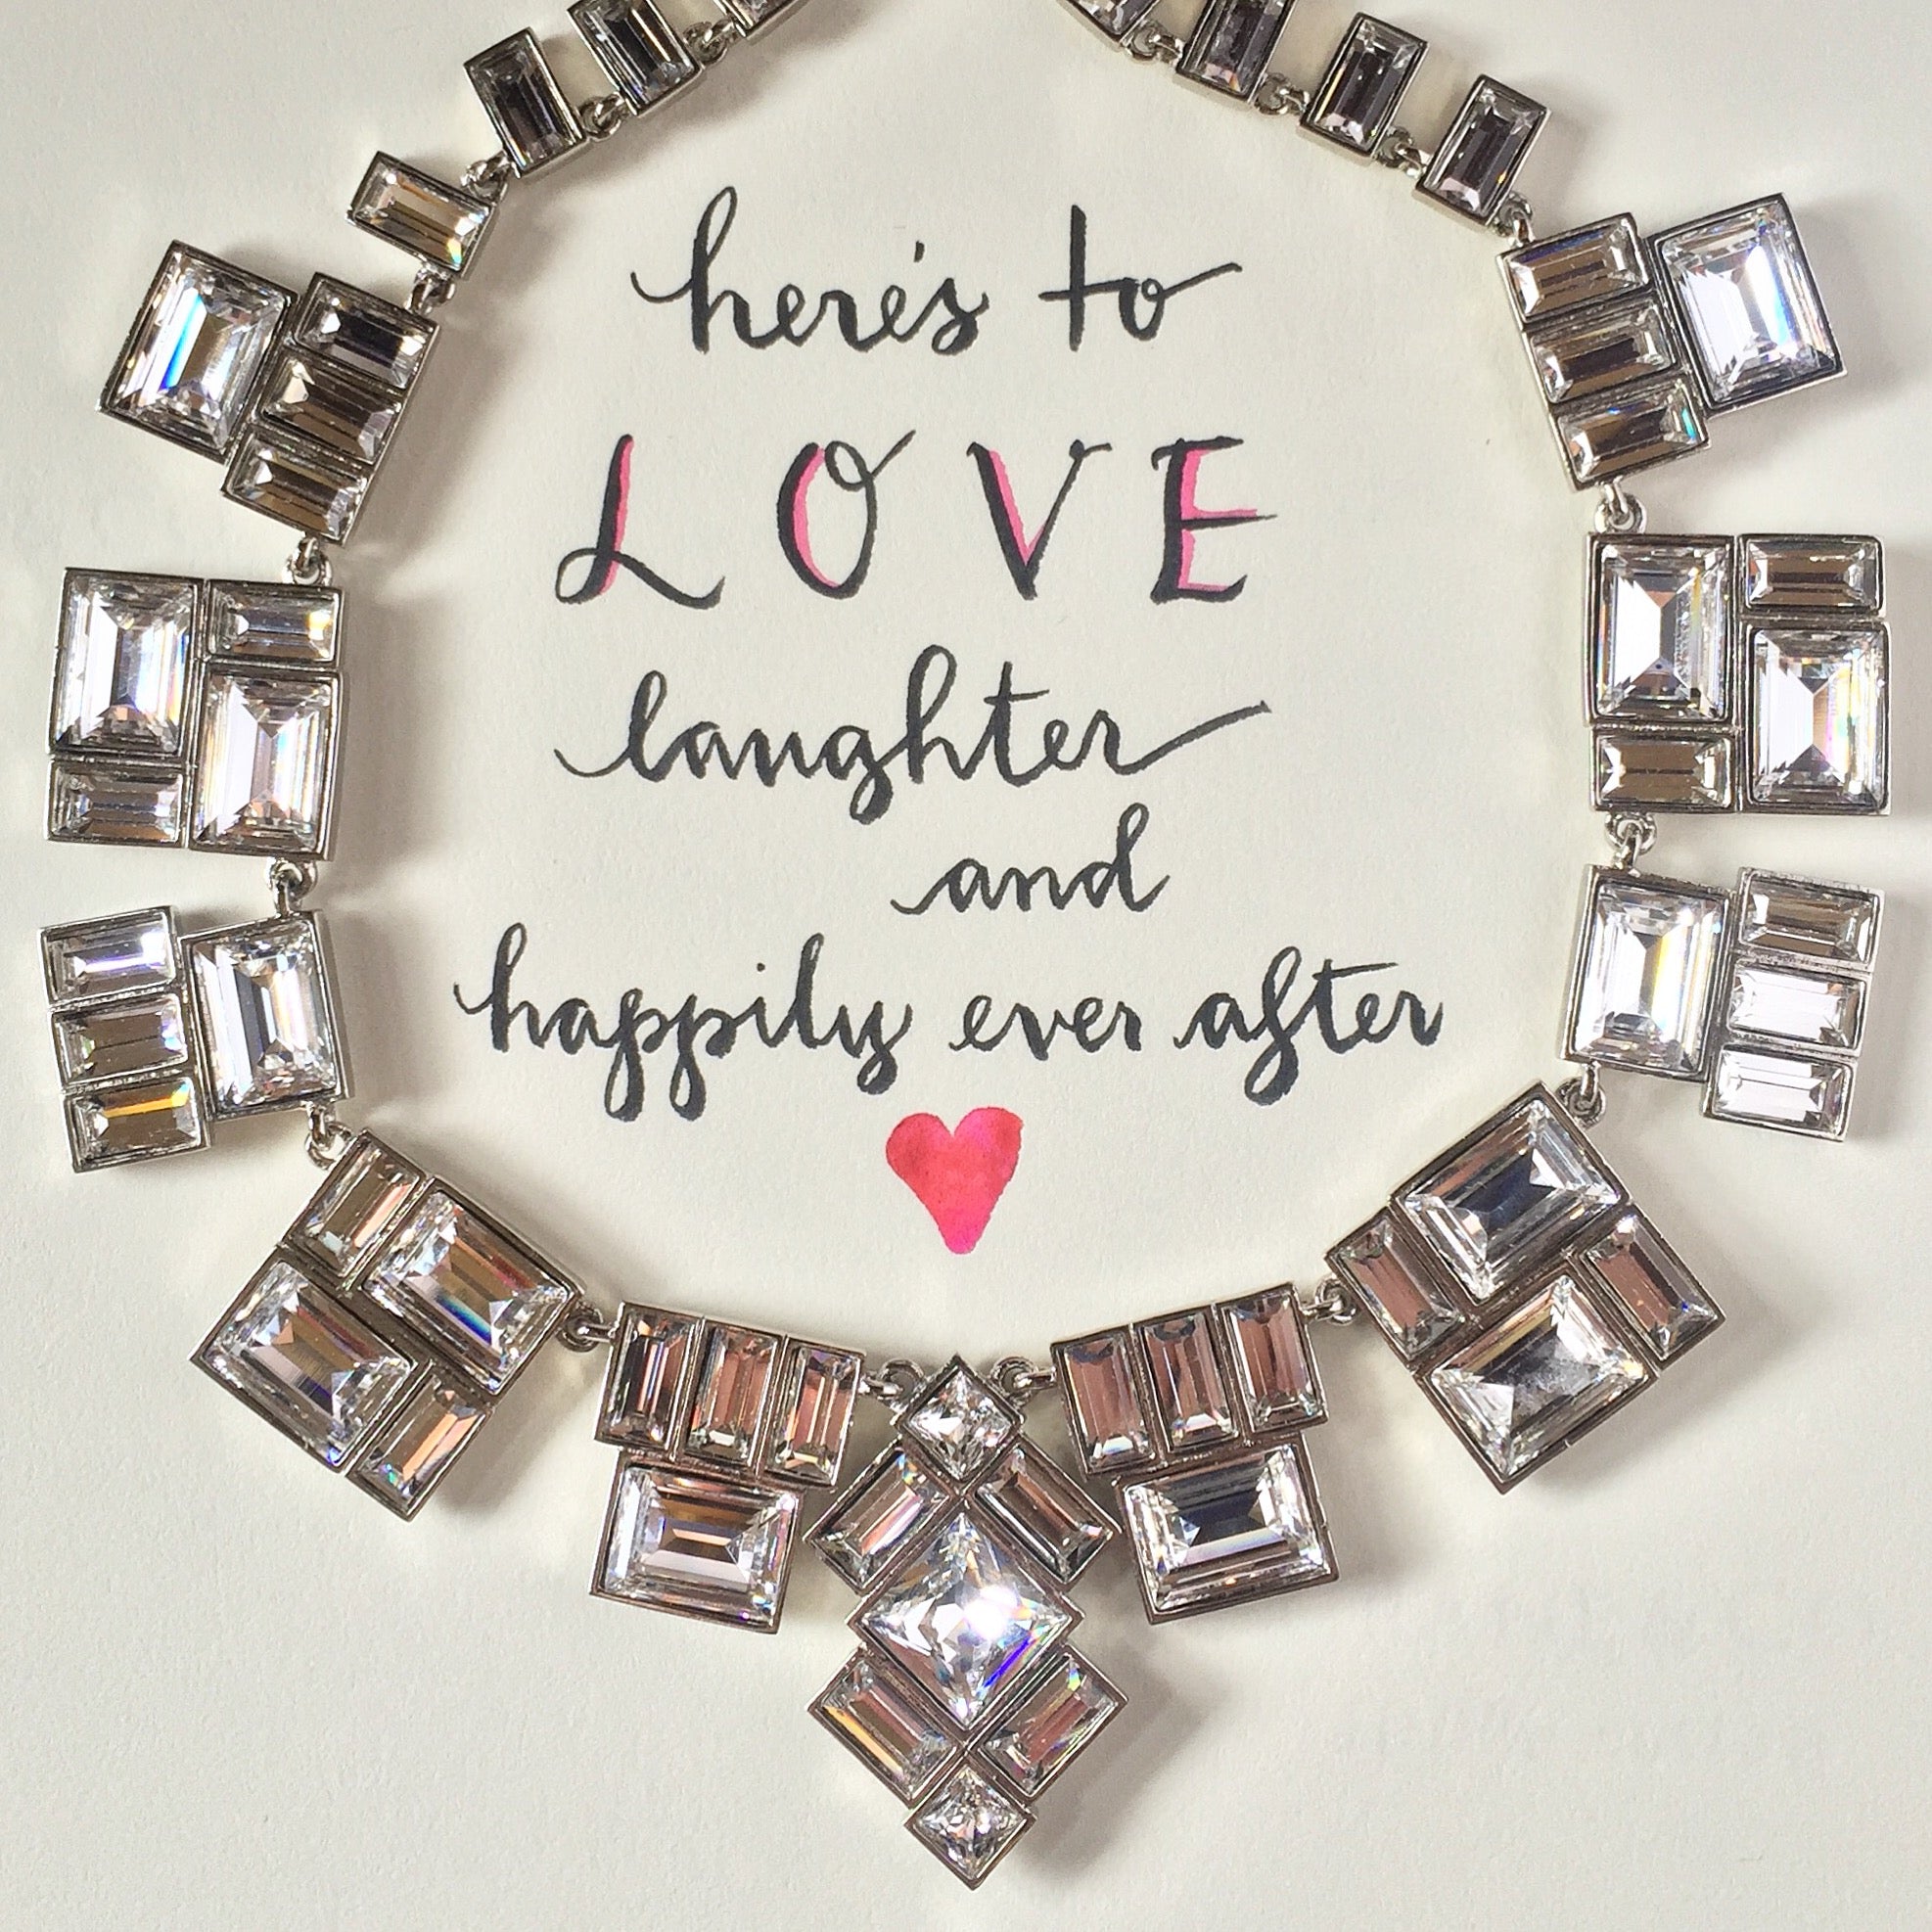 #Sequin Sayings - Here's to LOVE...